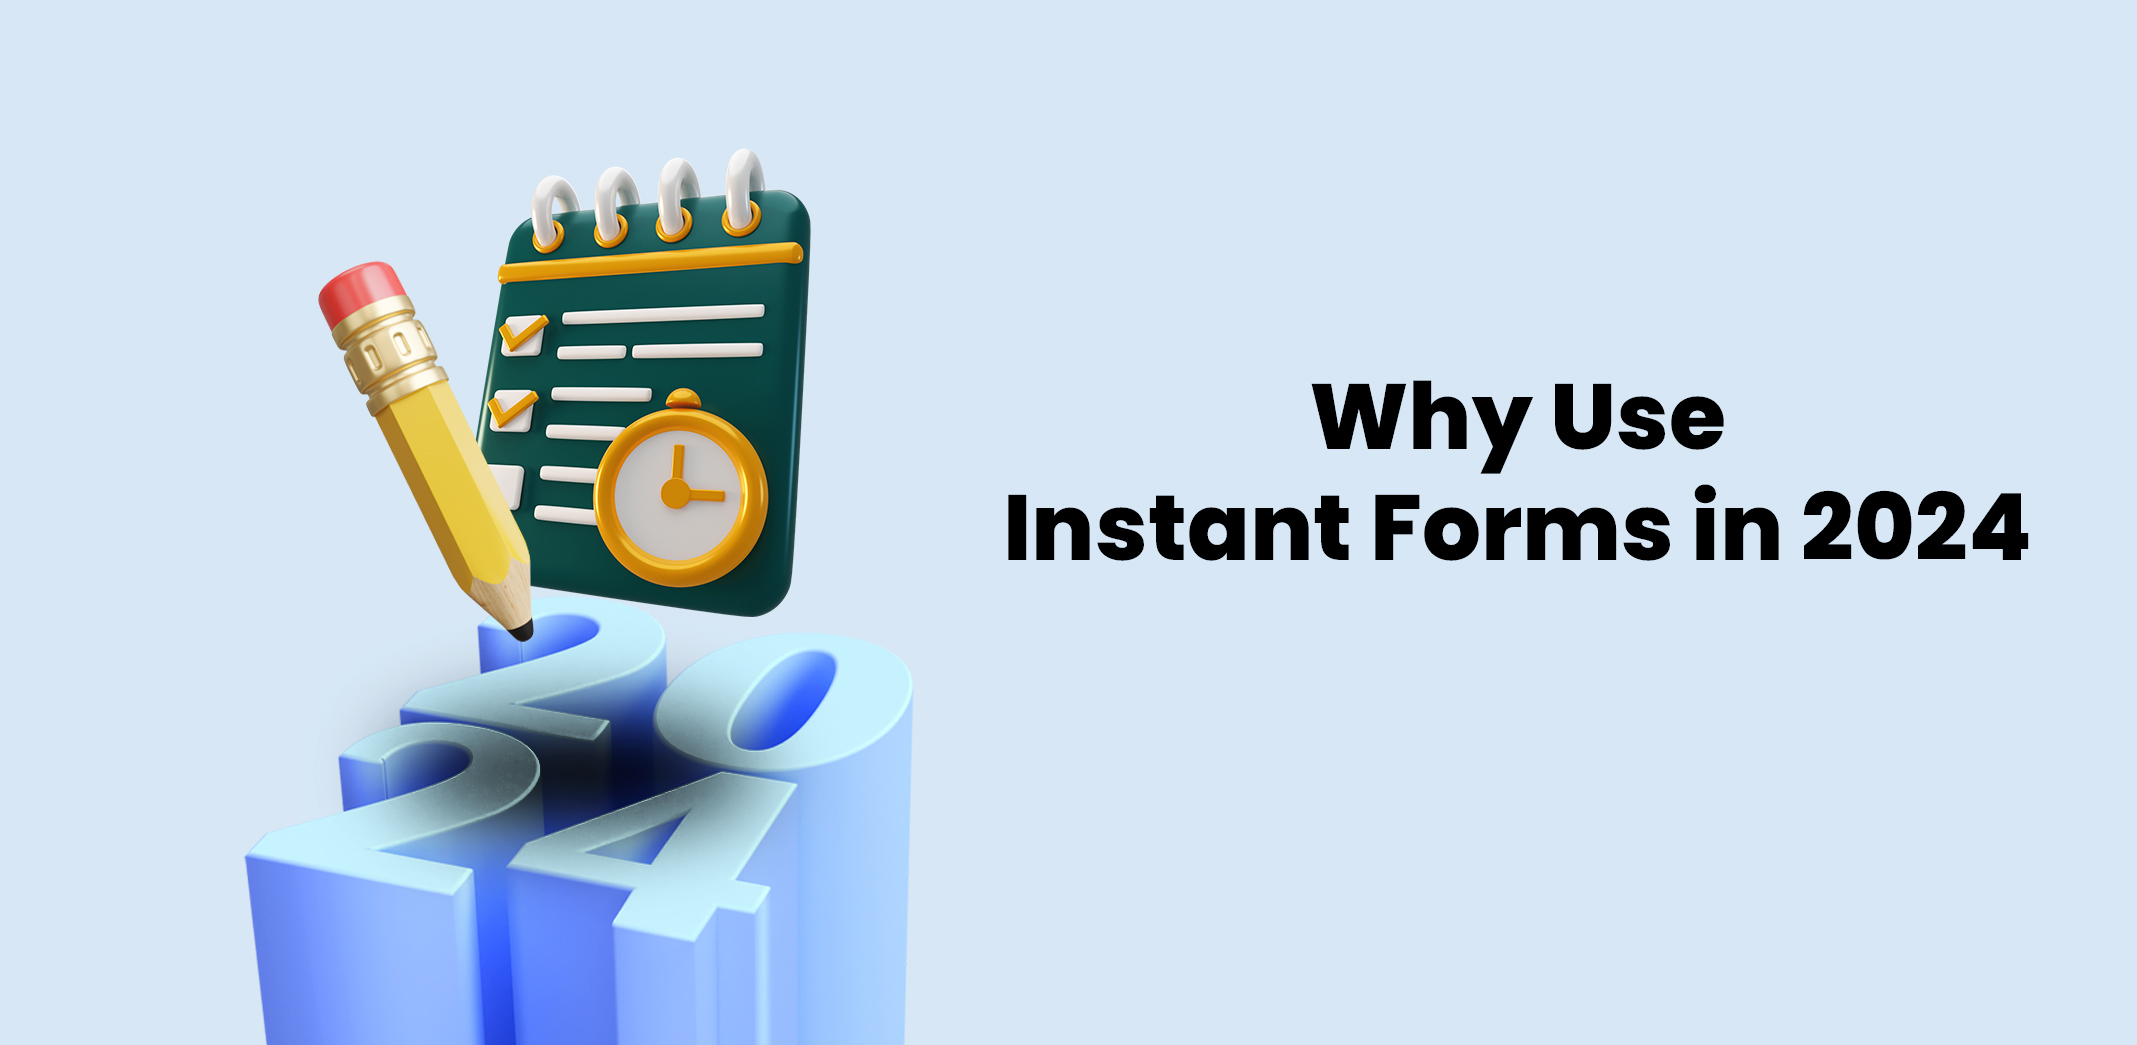 Why Use Instant Forms in 2024?